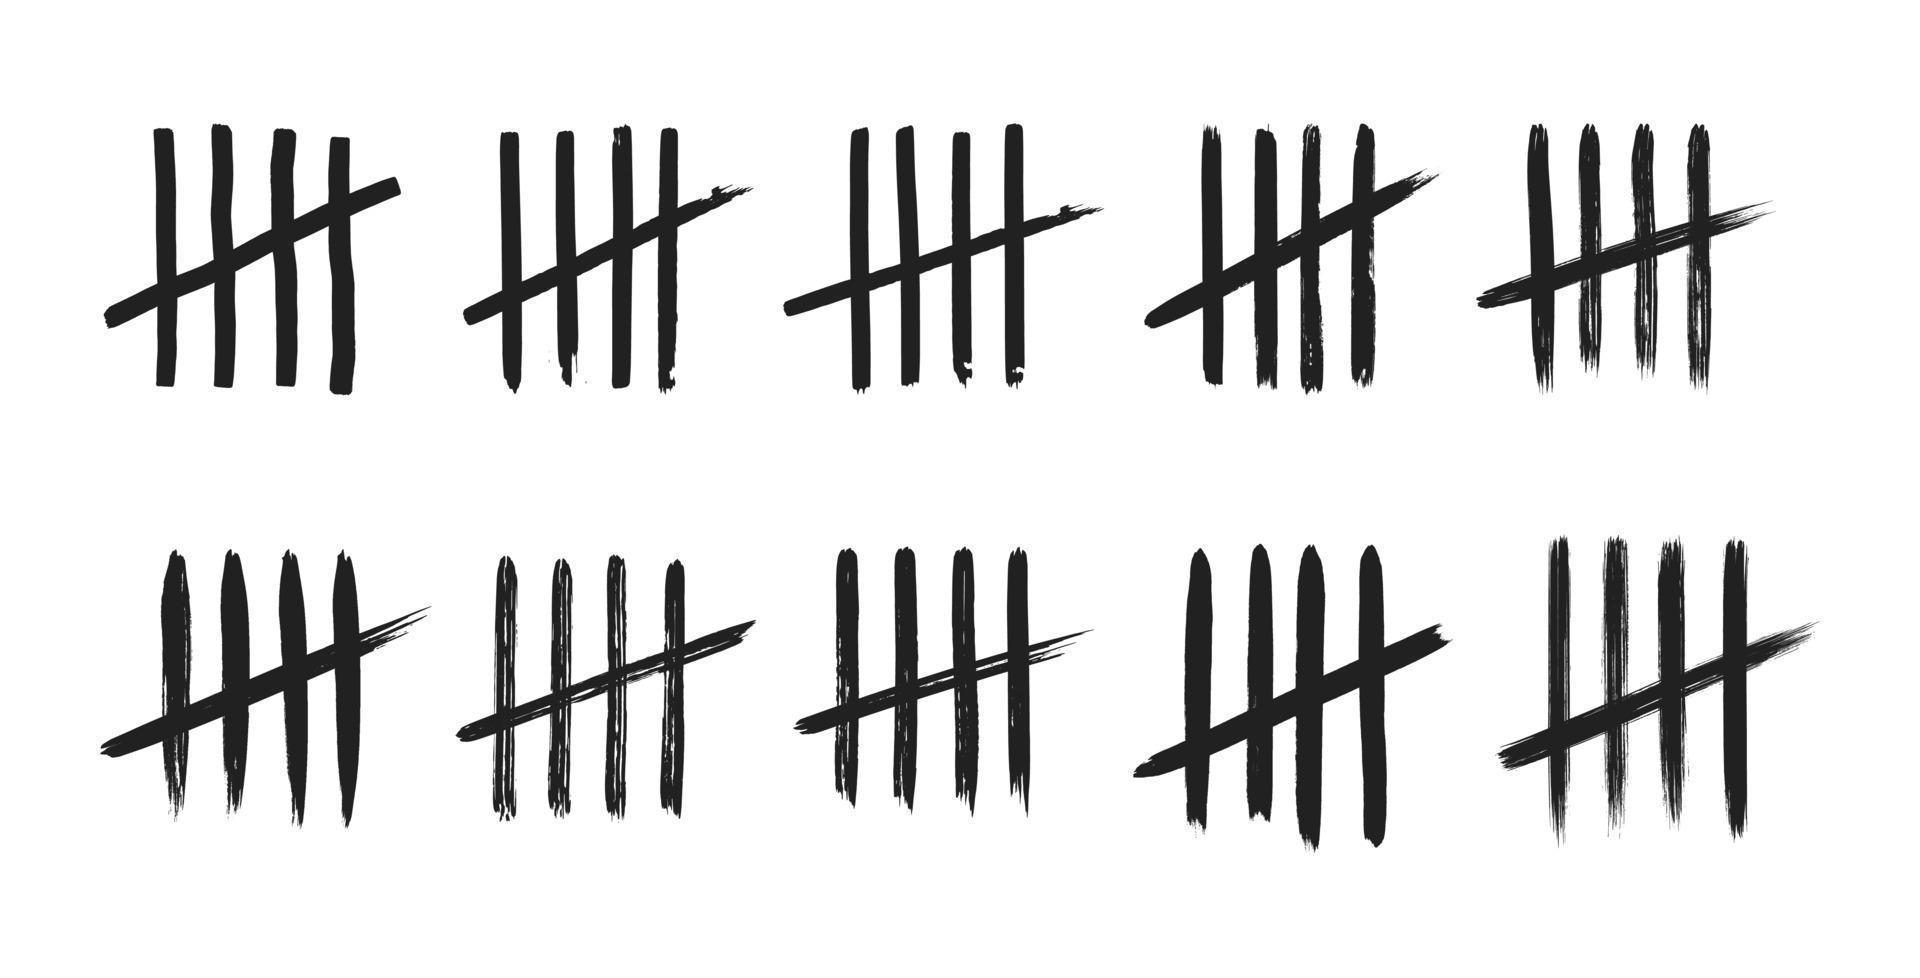 Tally marks on white board hand drawn dirty art style vector